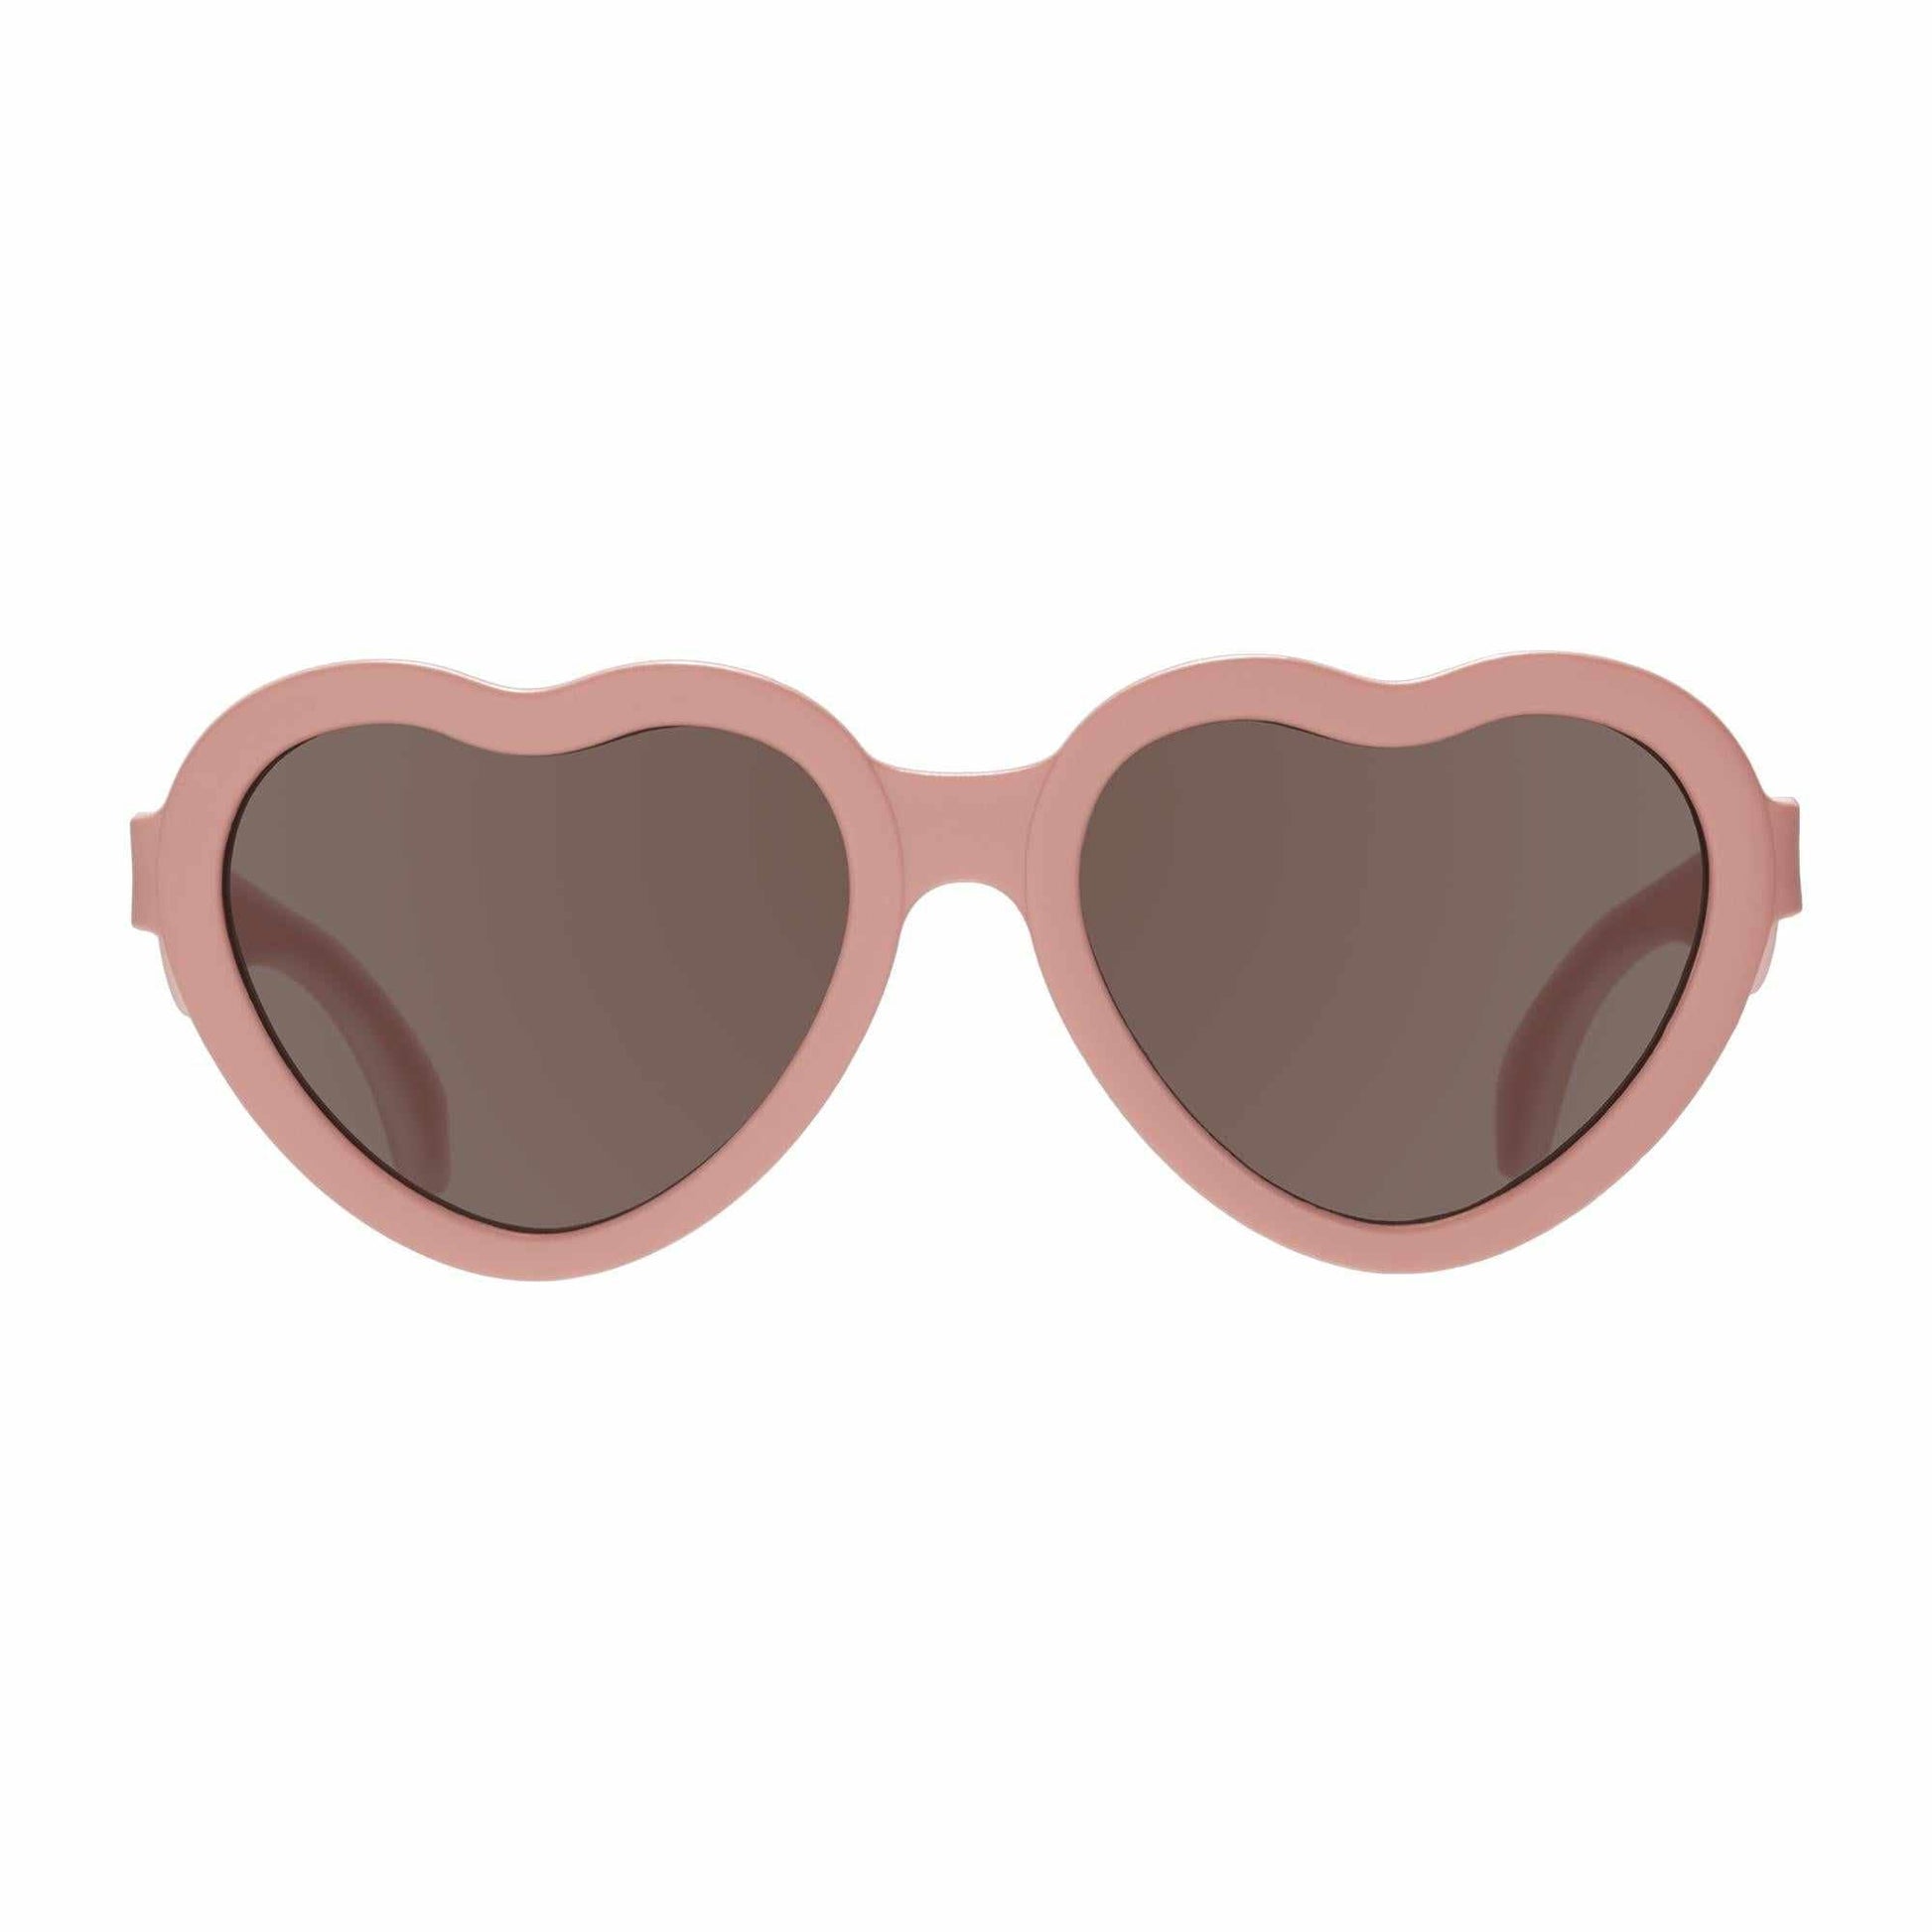 Limited Edition | Non-Polarized Mirrored Heart Sunglasses | Can't Heartly Wait